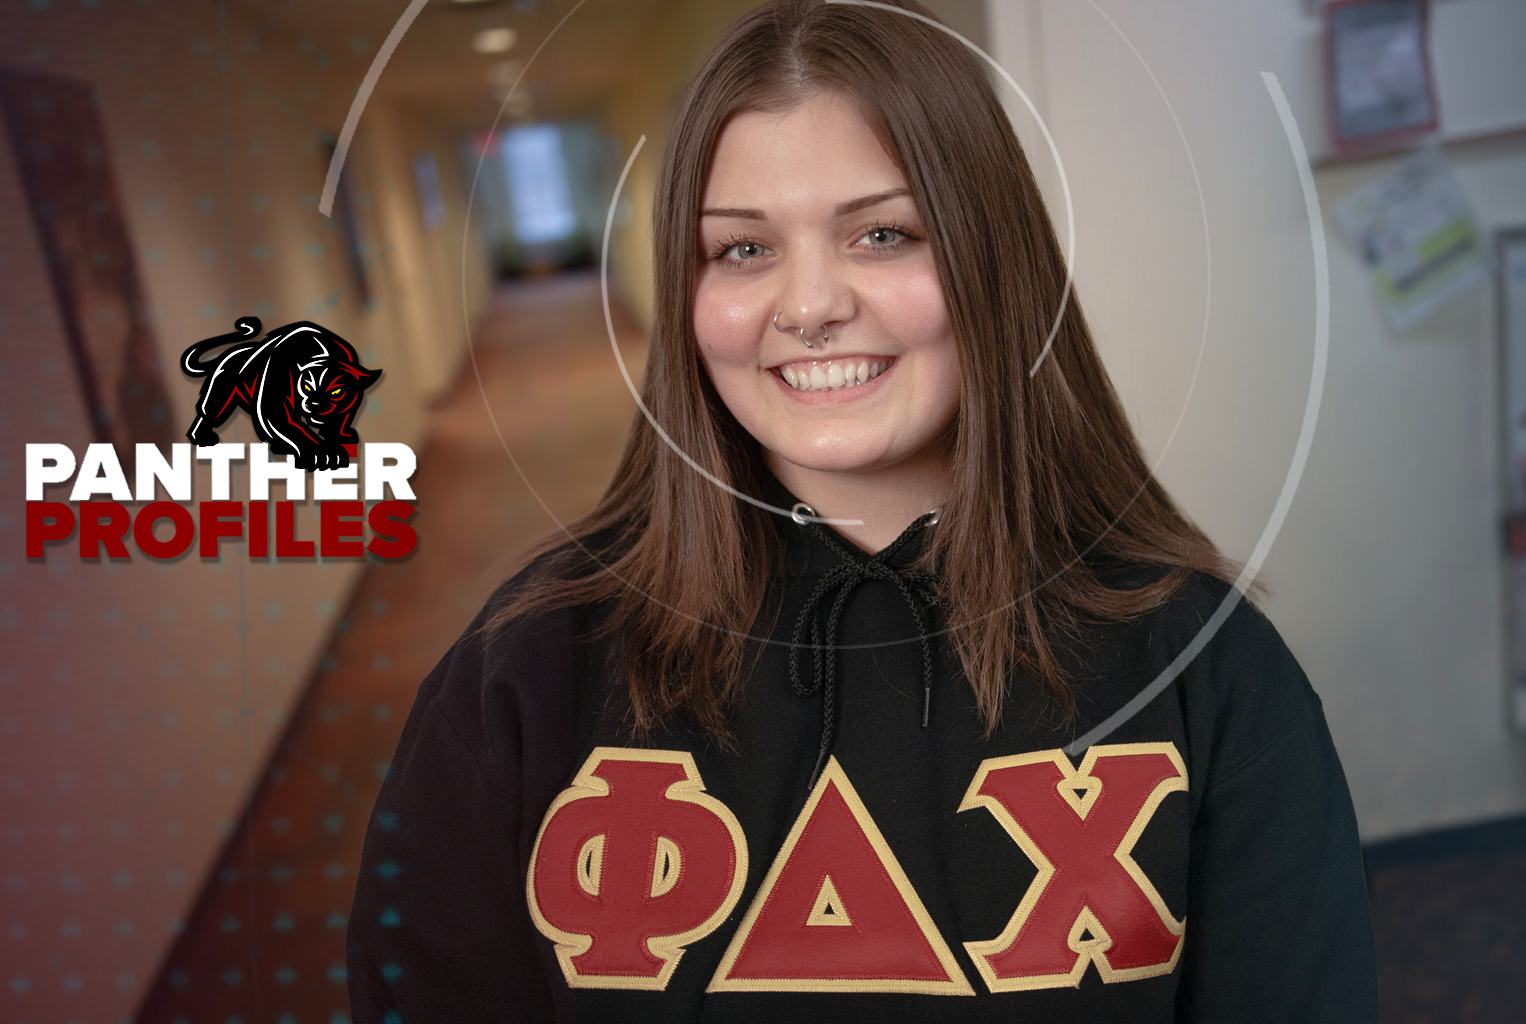 ACPHS Student Samantha Marion in a Phi Delta Chi sweatshirt with Panther Profile logo